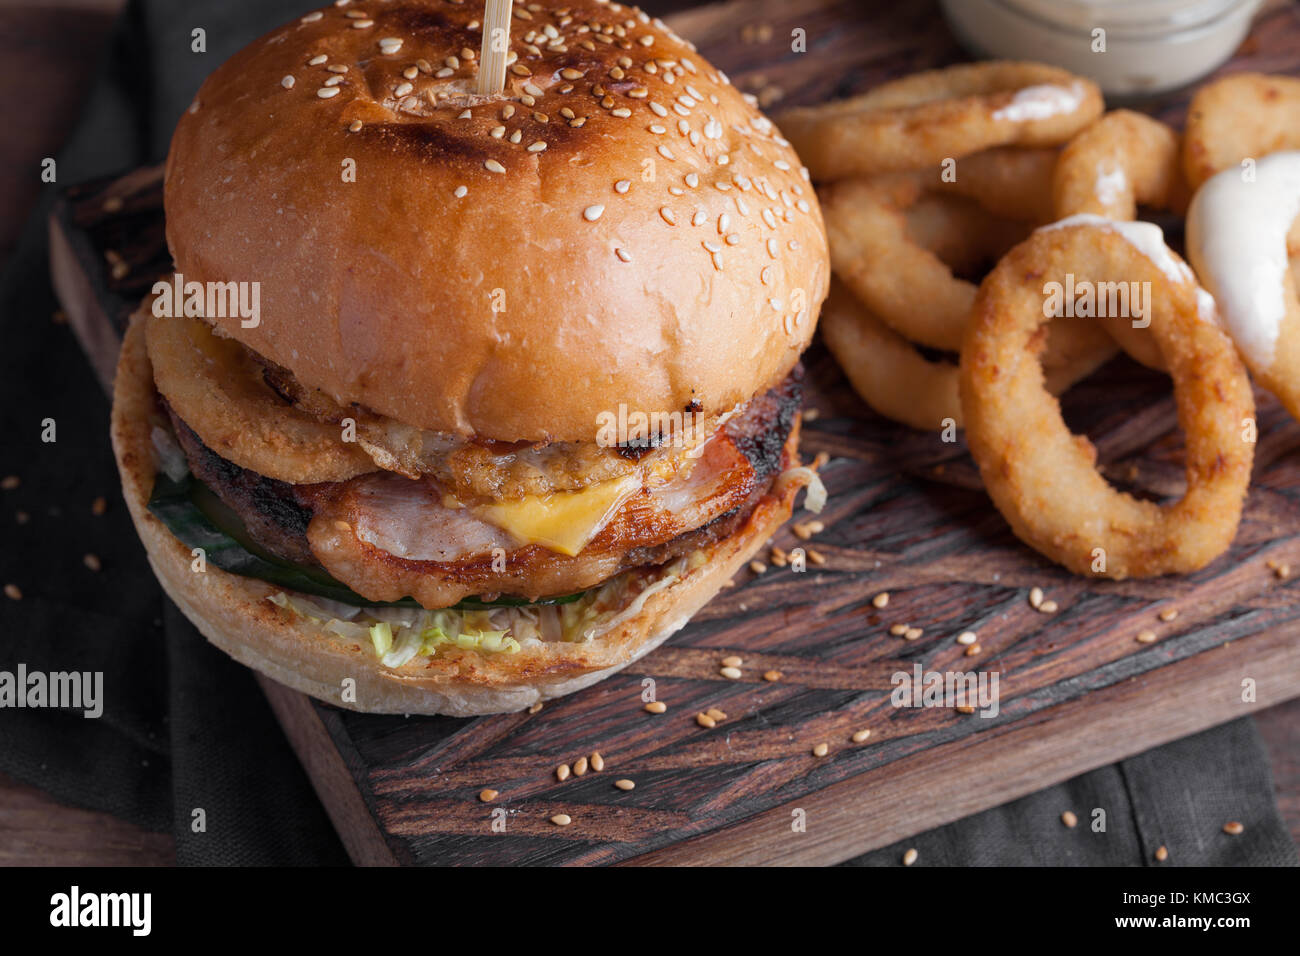 Closeup of a tasty Burger with appetizers such as fried onion rings with a white garlic sauce. Juicy Burger with bacon and cheese on a dark wood backg Stock Photo